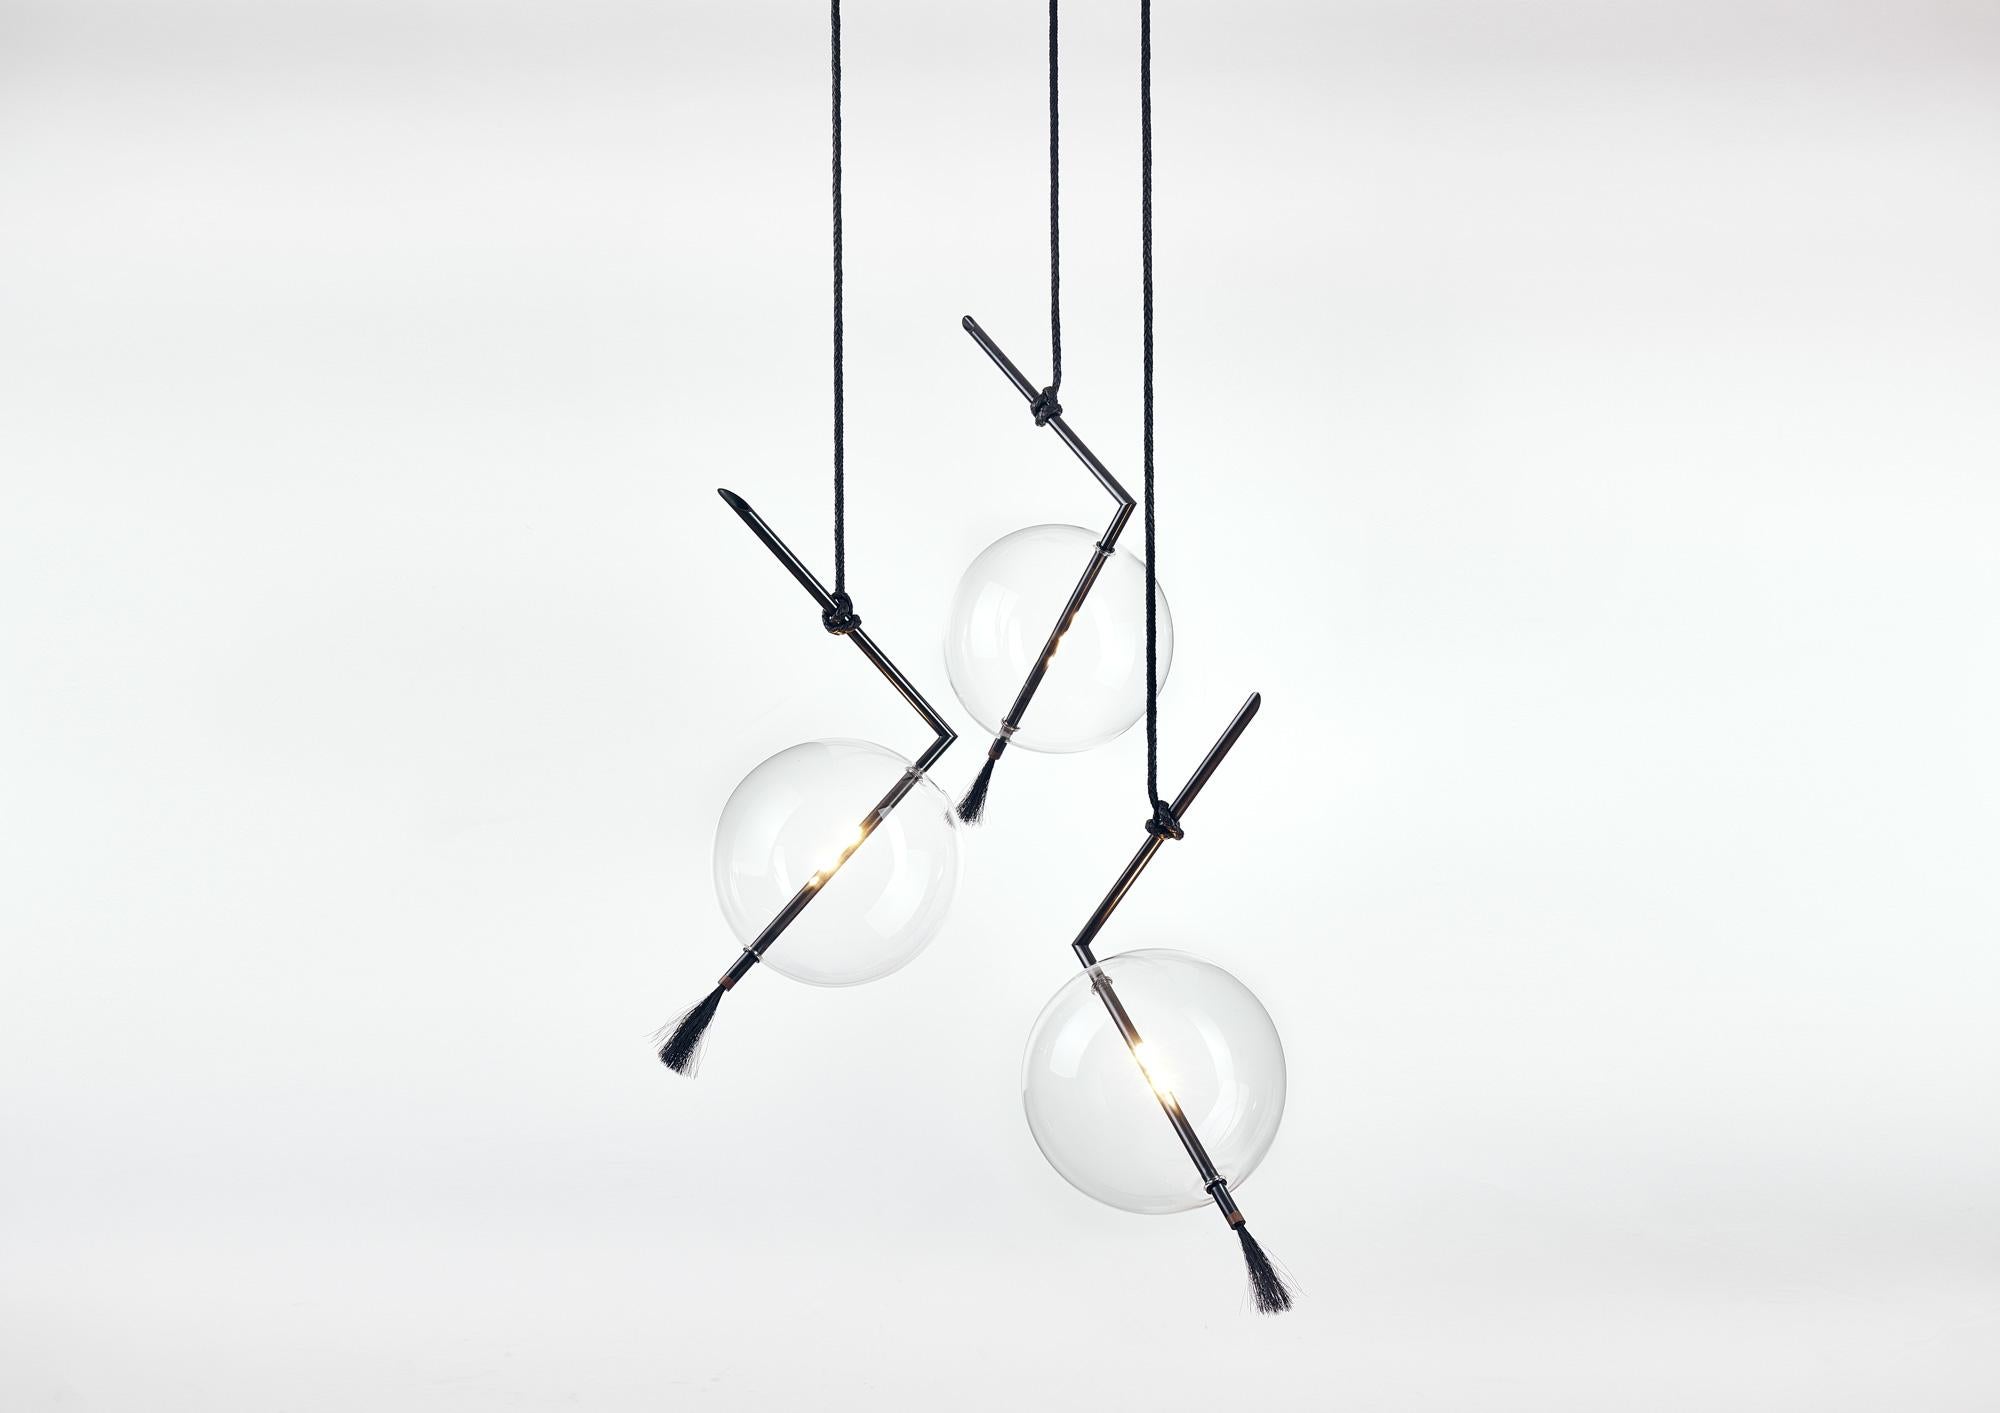 Nuvola black three lights customizable chandelier/pendant contemporary light-fixture floats in space like a jewel hanging from the ceiling.
The pure geometry of the blackened brass rod containing the led light contrasts with the ephemeral